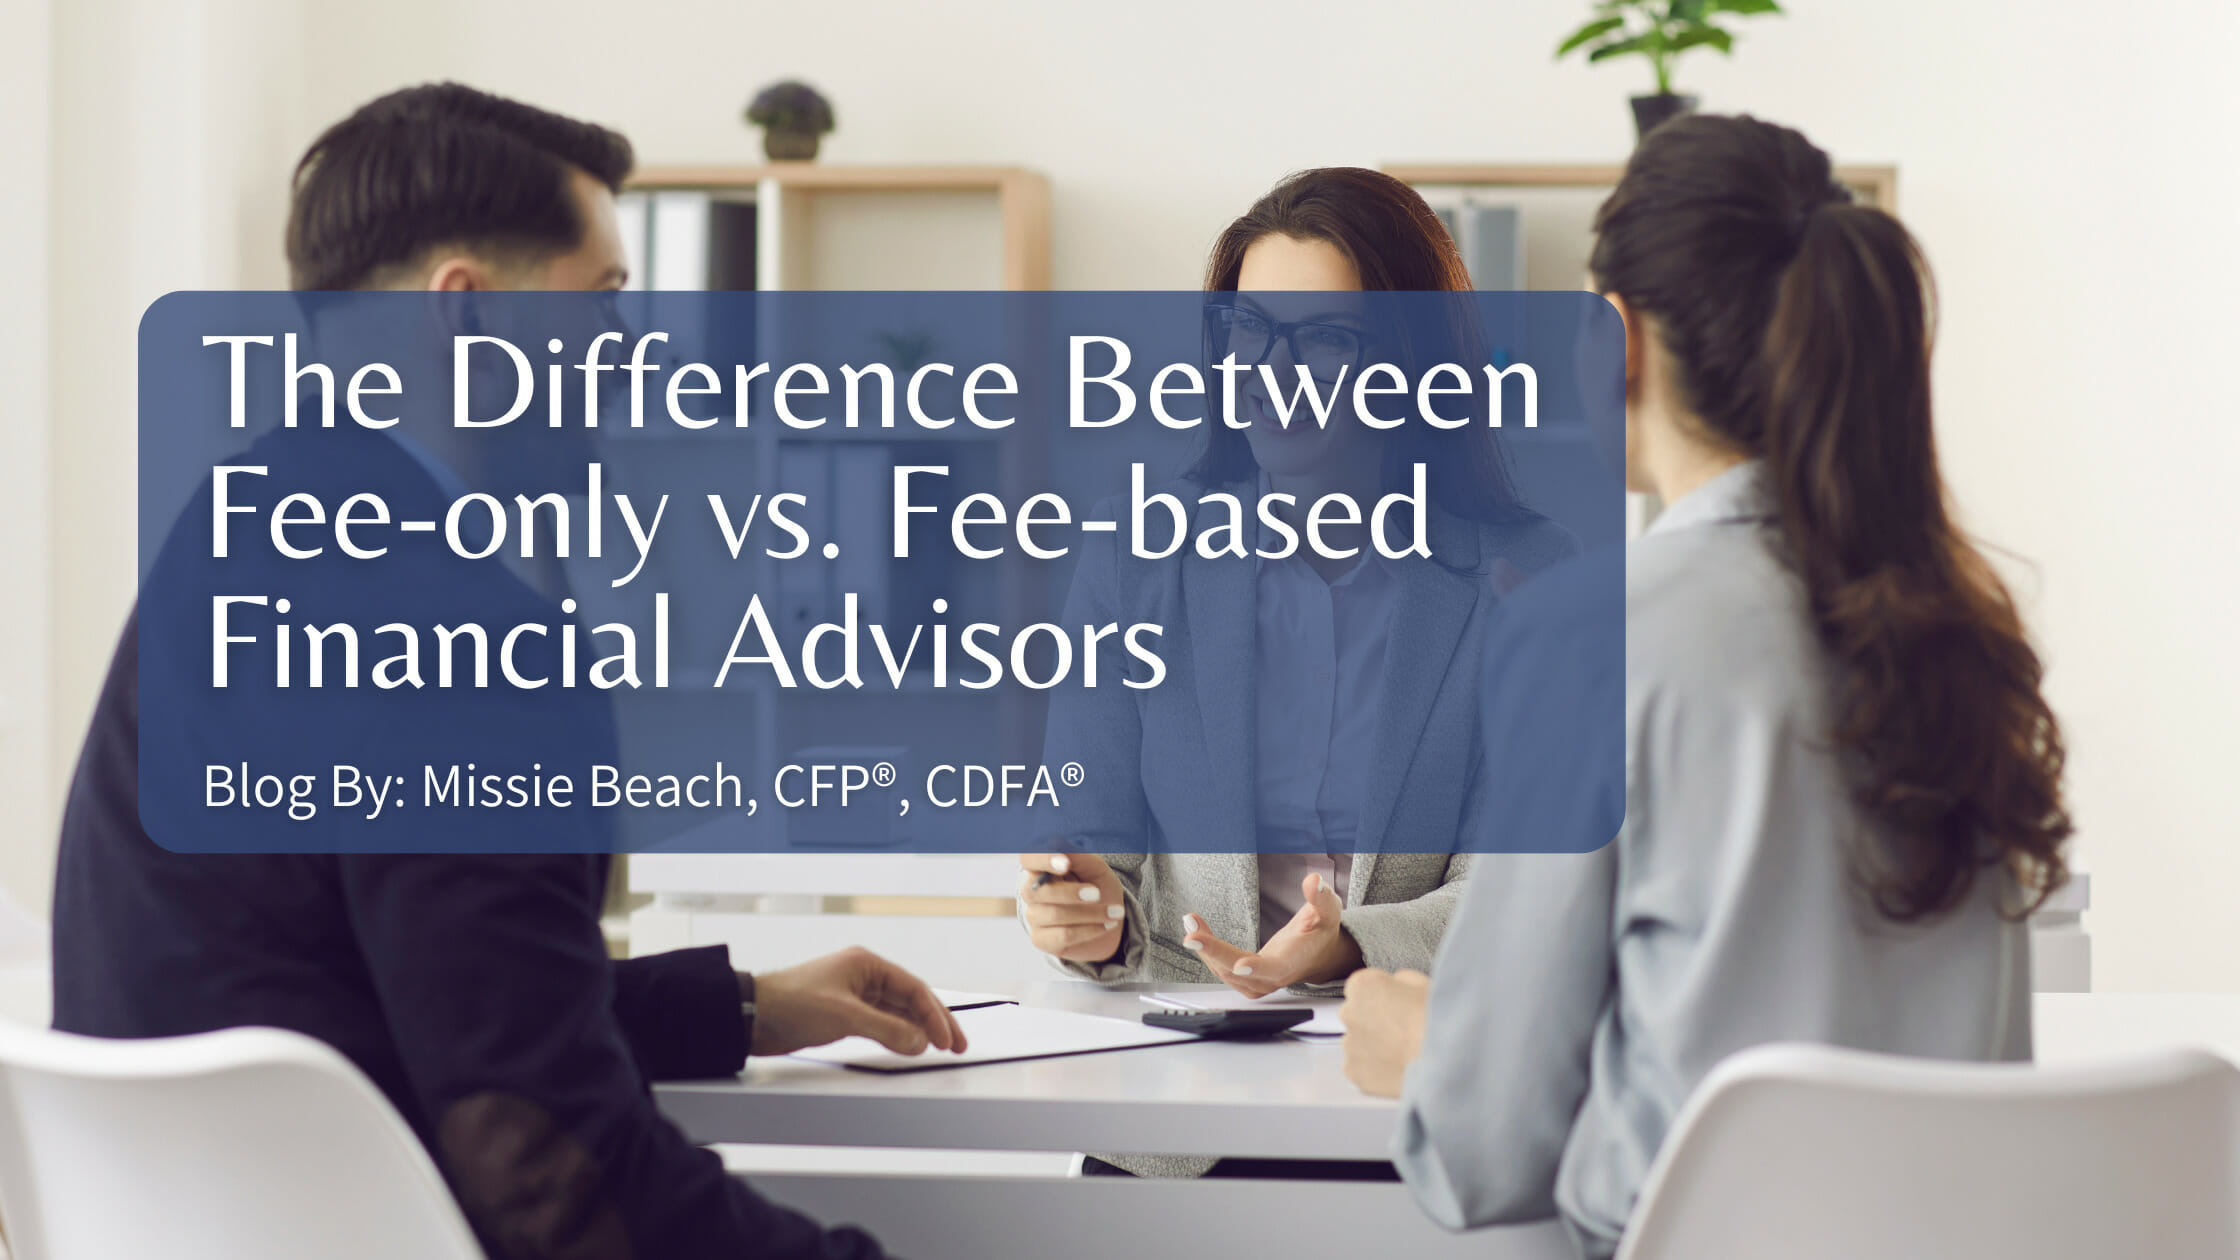 The Difference Between Fee-only vs. Fee-based Financial Advisors